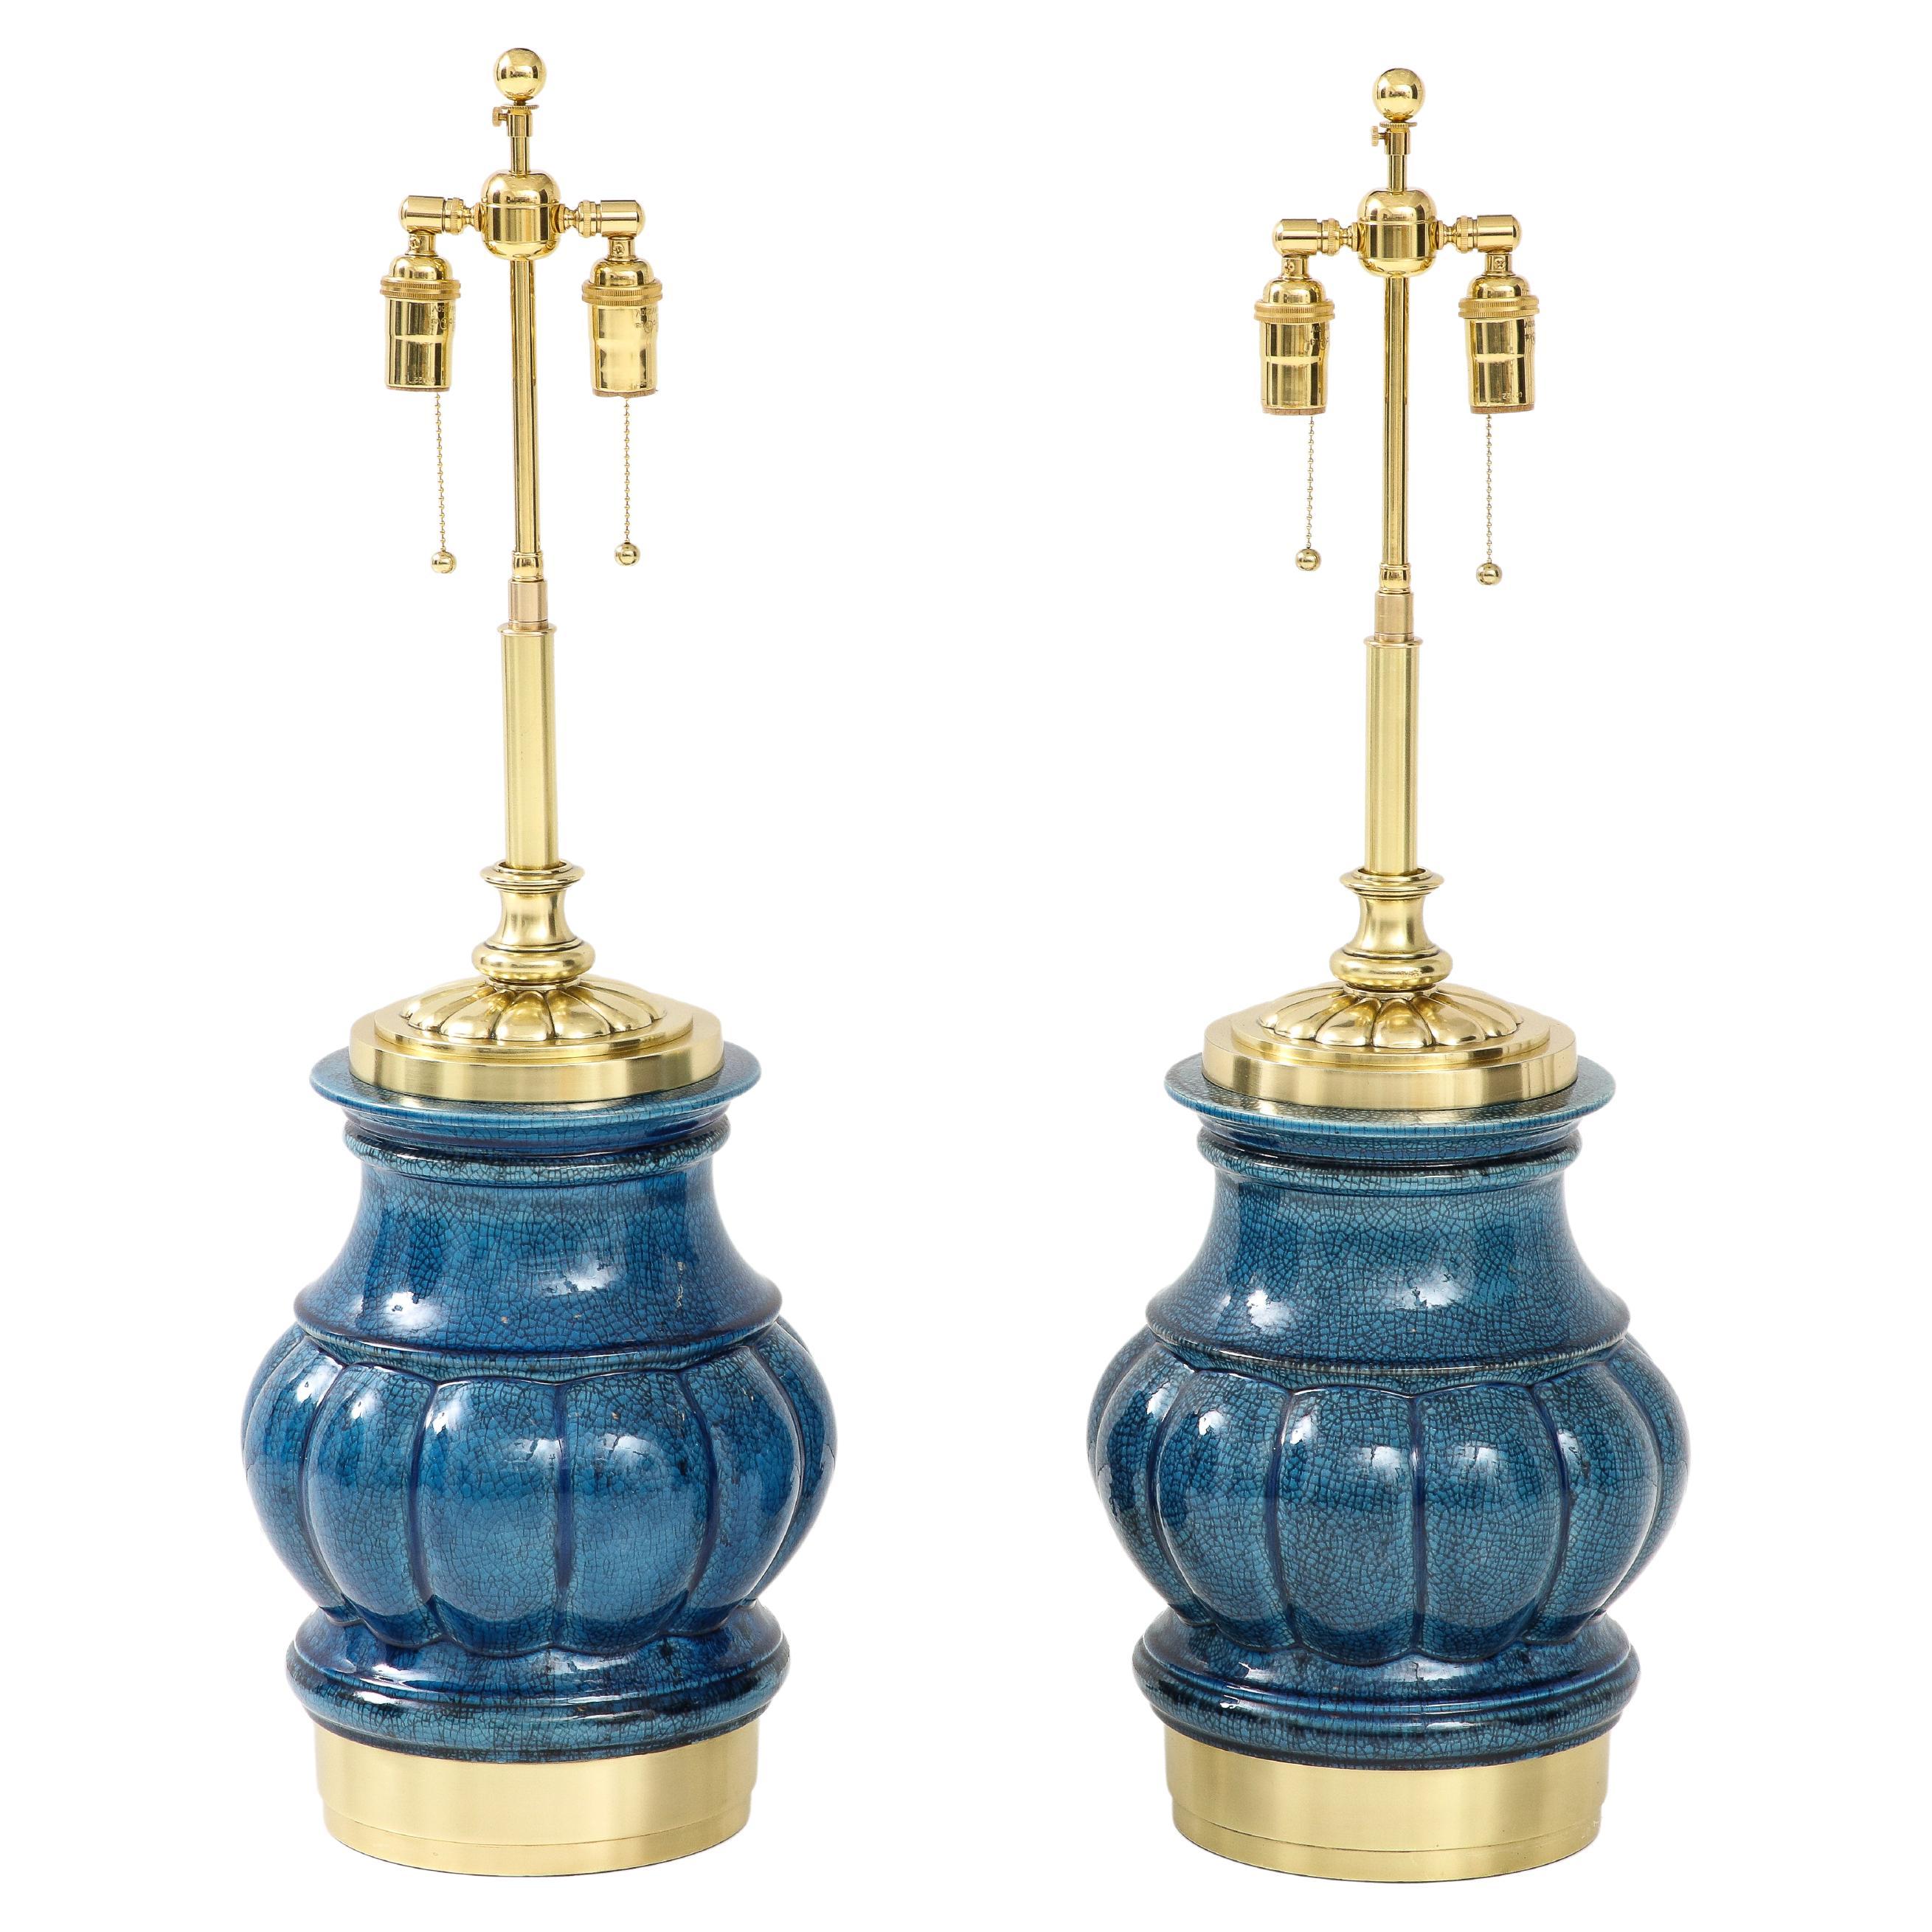 Pair of Ceramic Lamps with a Blue Crackle Glaze